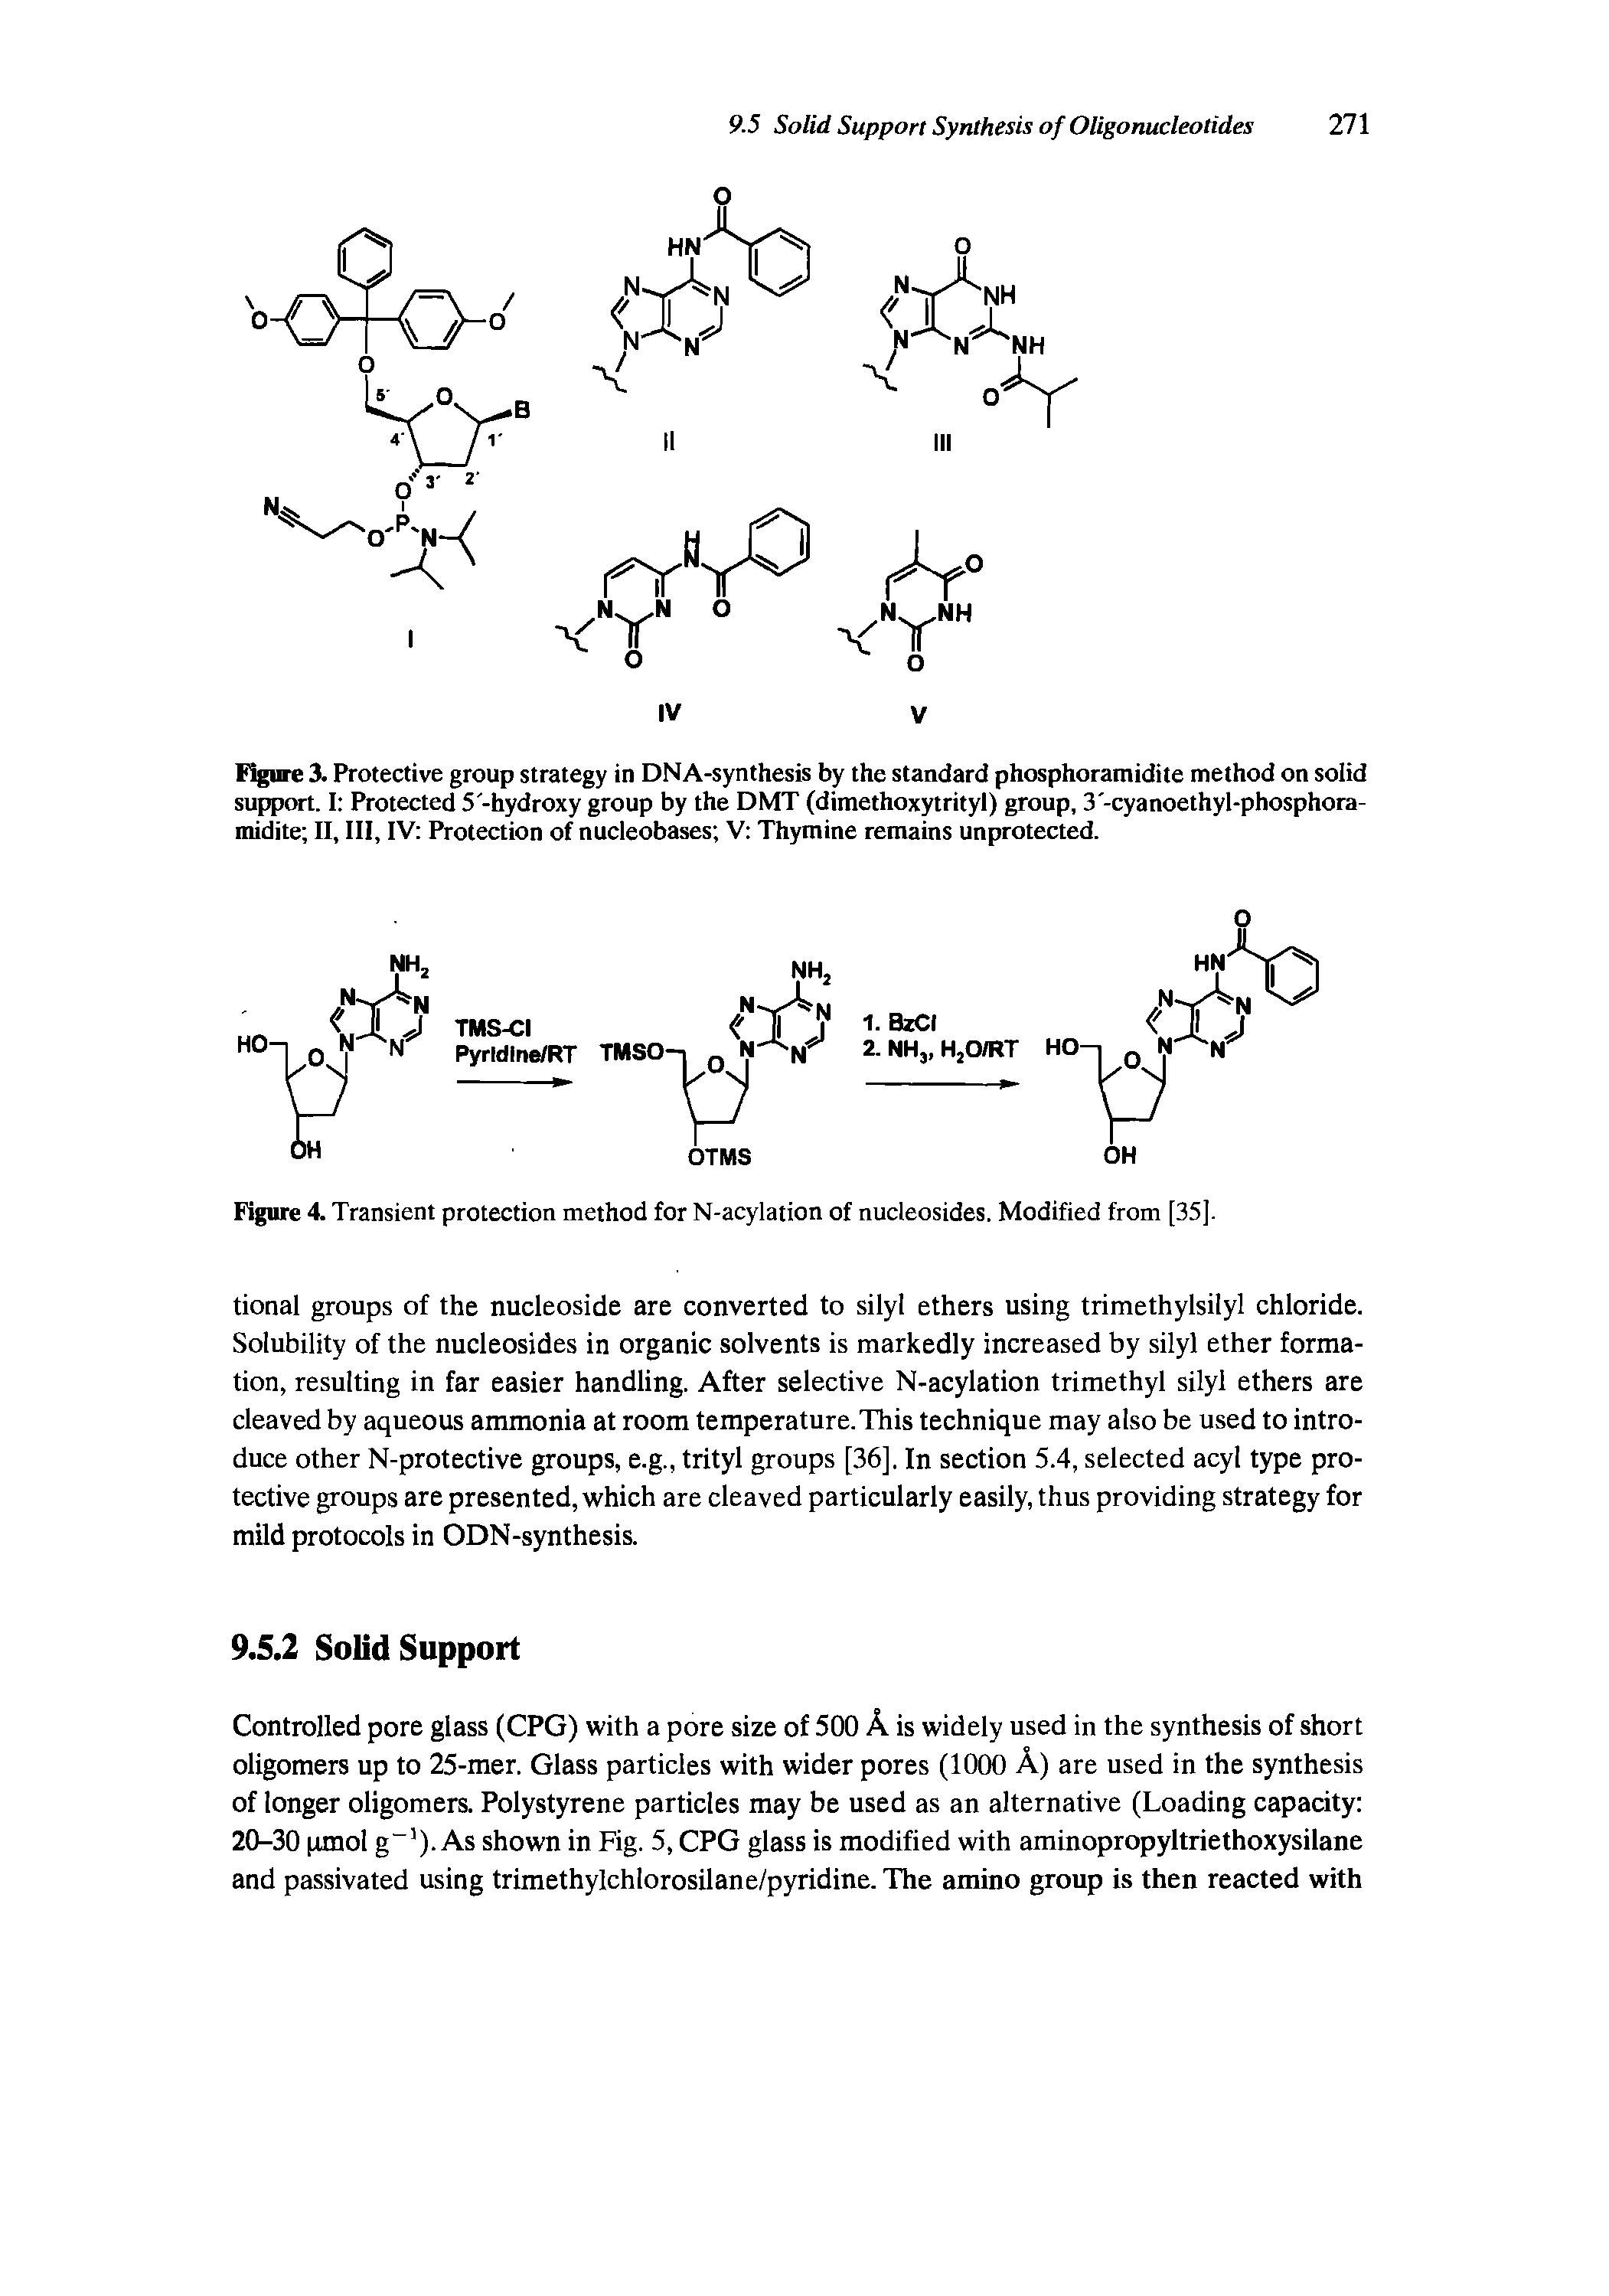 Figure 3. Protective group strategy in DNA-synthesis by the standard phosphoramidite method on solid support. I Protected 5 -hydroxy group by the DMT (dimethoxytrityl) group, 3 -cyanoethyl-phosphora-midite II, III, IV Protection of nucleobases V Thymine remains unprotected.